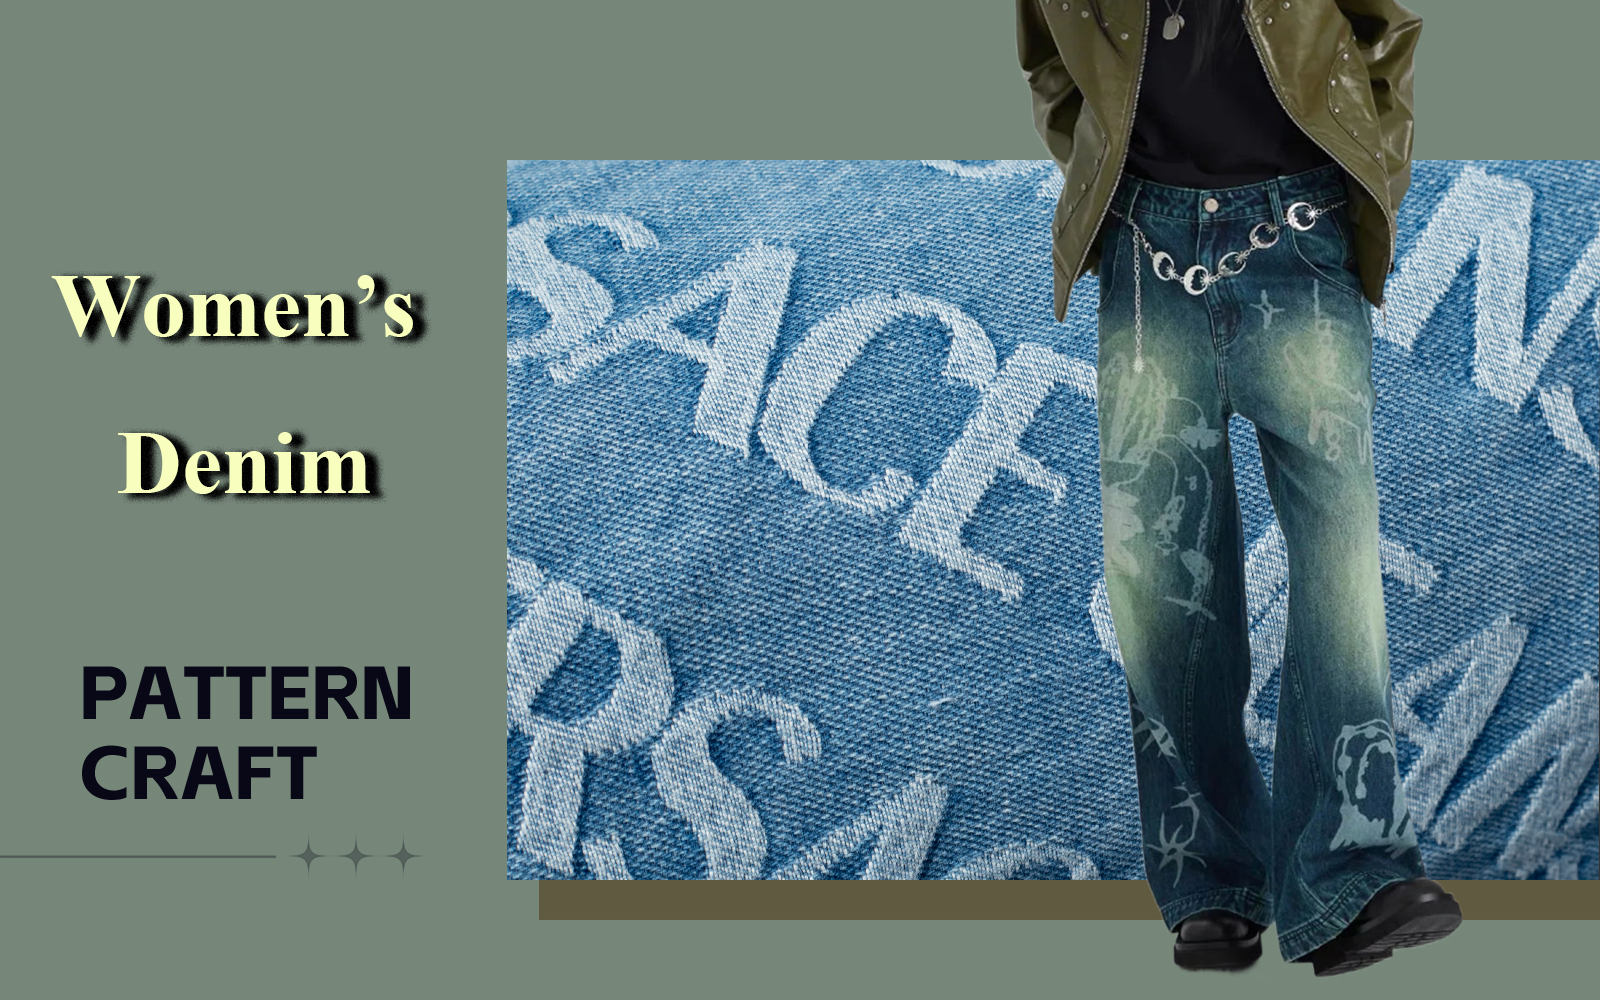 Embroidery & Printing -- The Pattern Craft Trend for Women's Denim